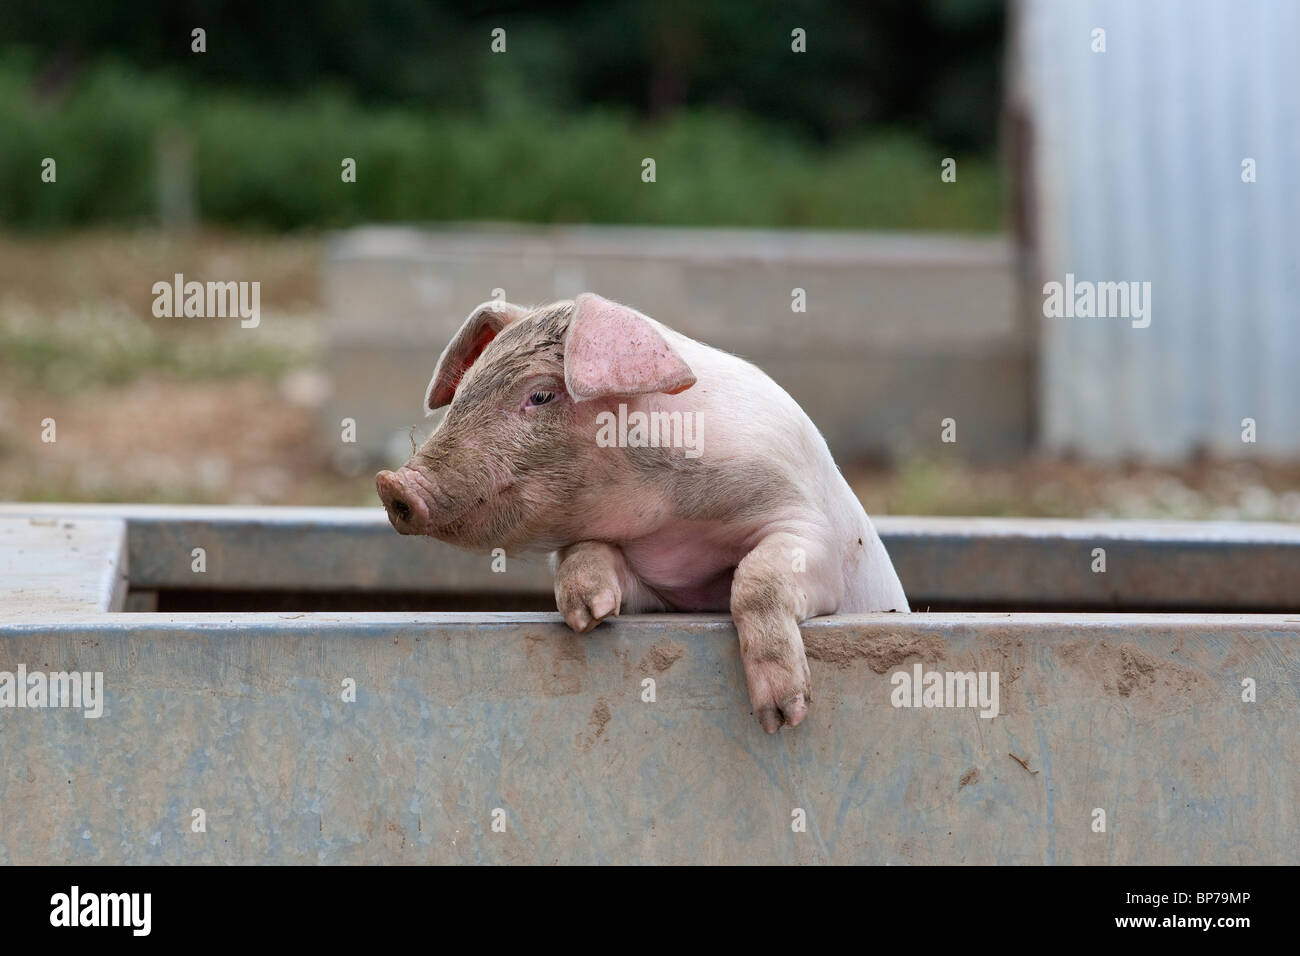 Single Piglet looking from ark Stock Photo